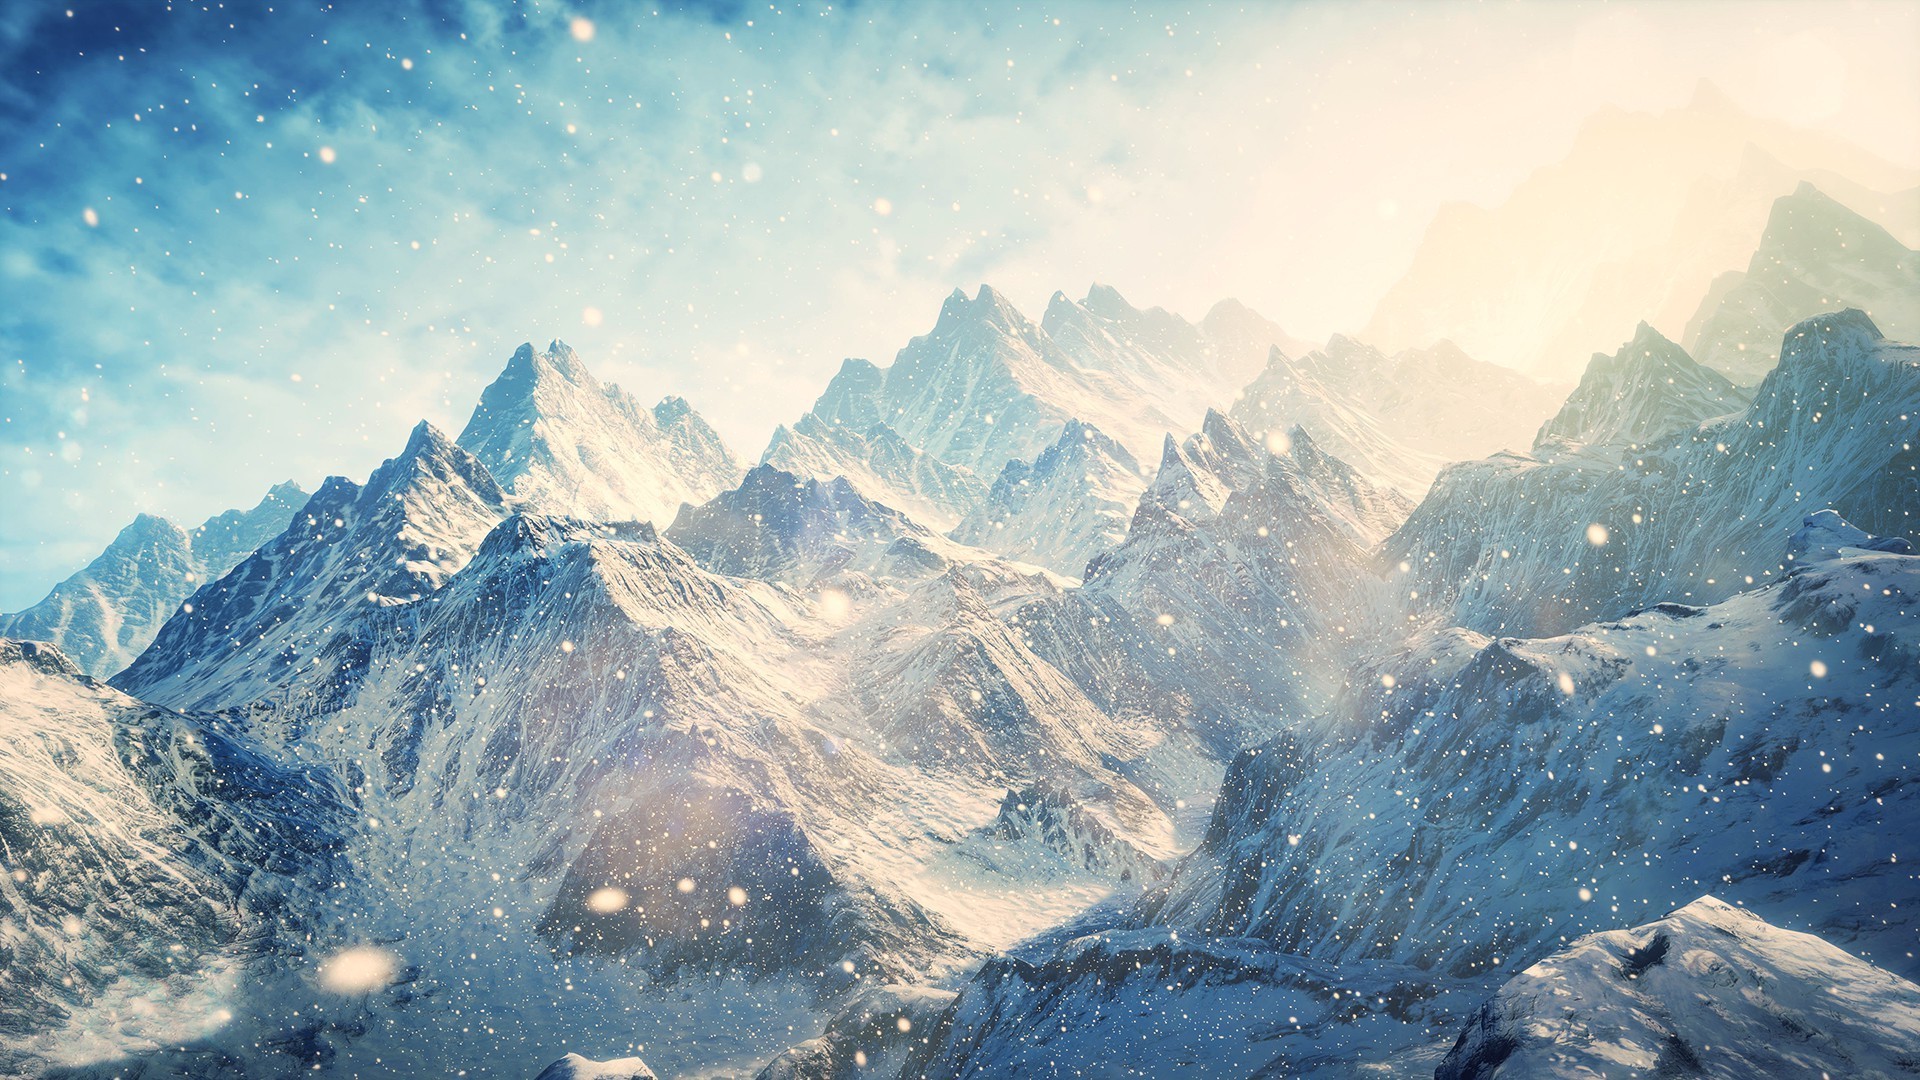 An awesome wallpaper of winter. A landscape wallpaper for your desktop .